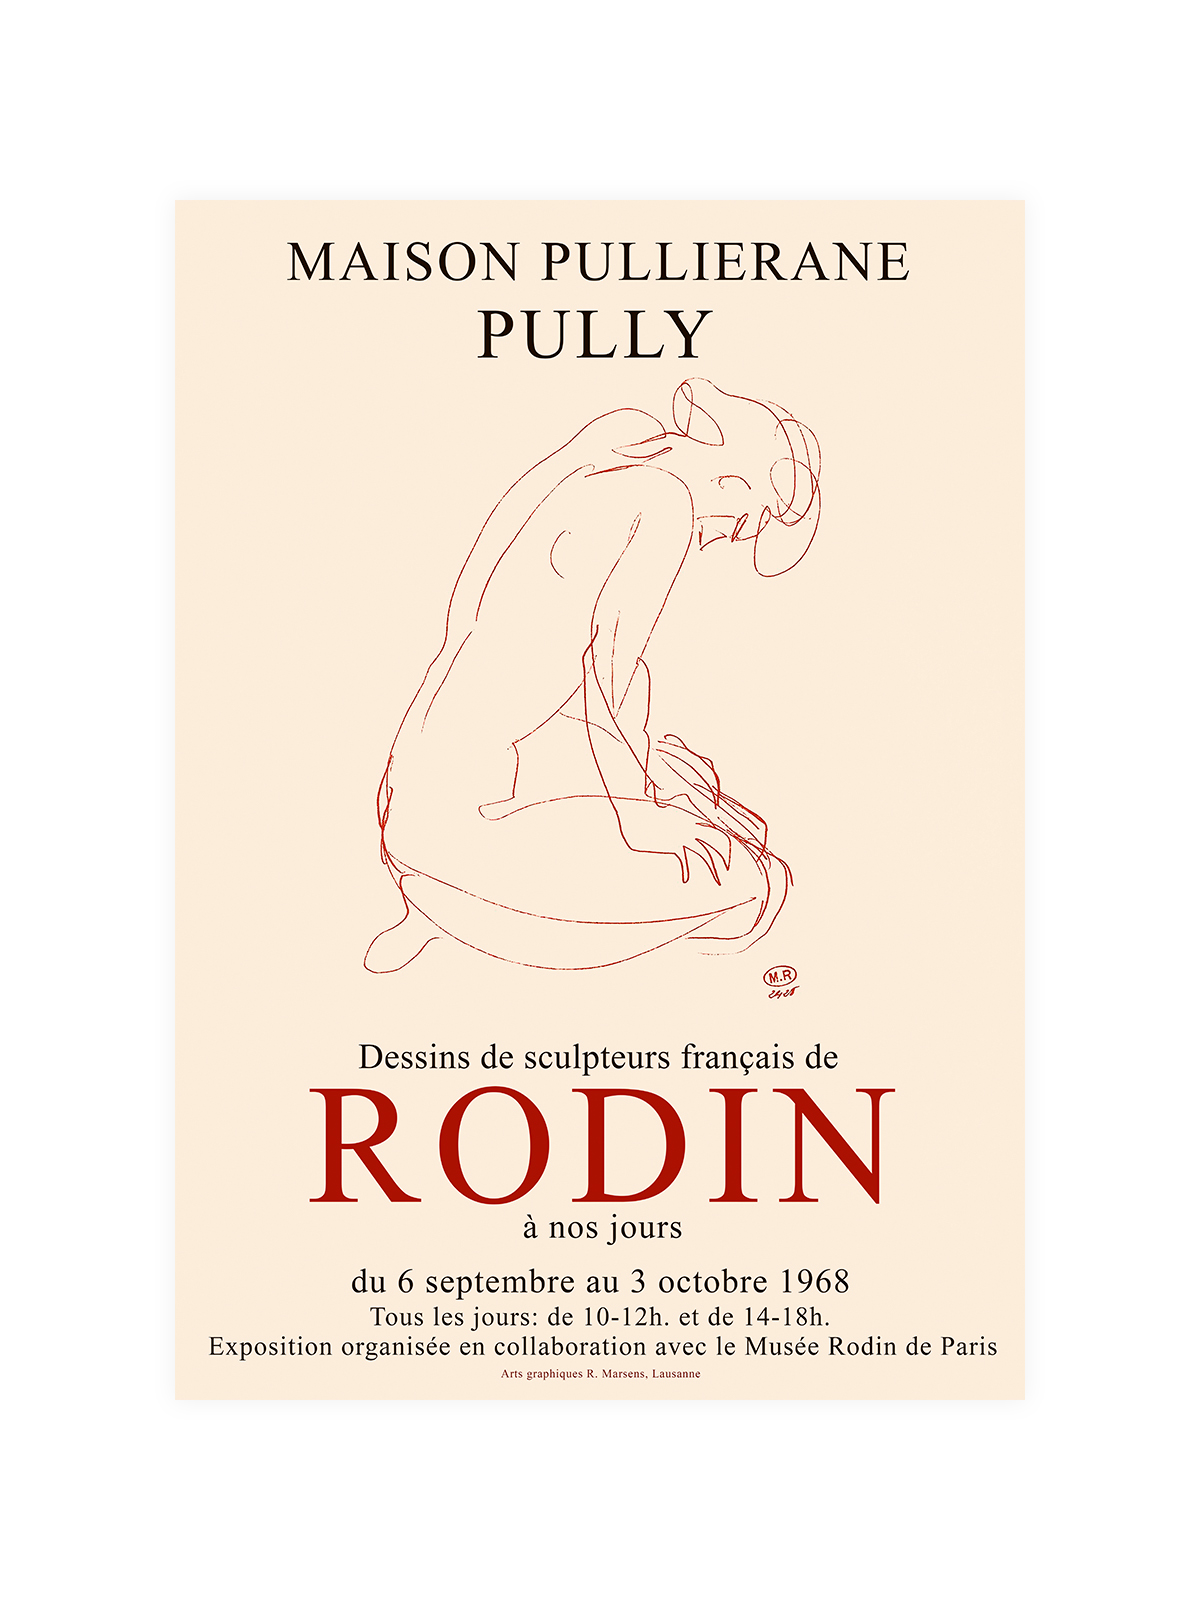 The Rodin Pully Exhibition Poster